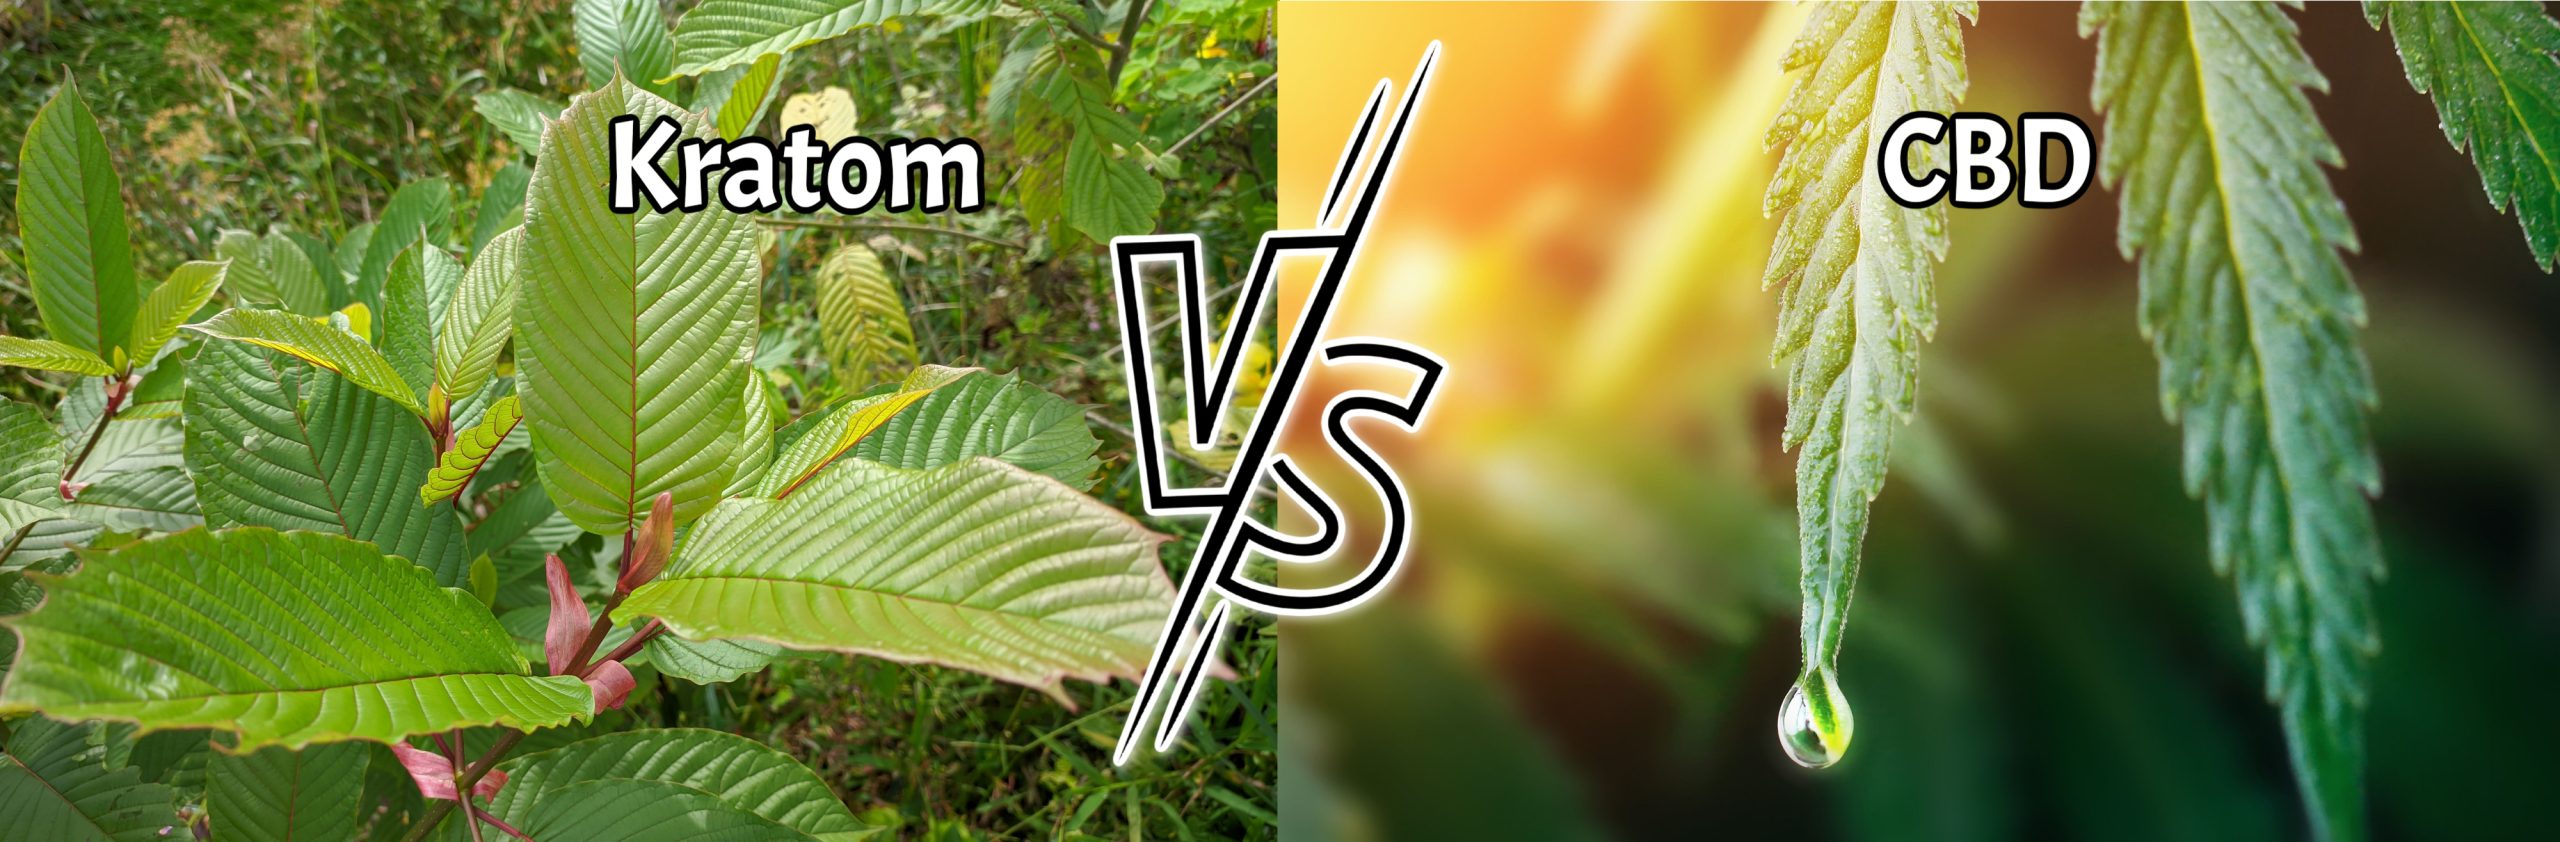 image of kratom vs cbd which one is better for each use